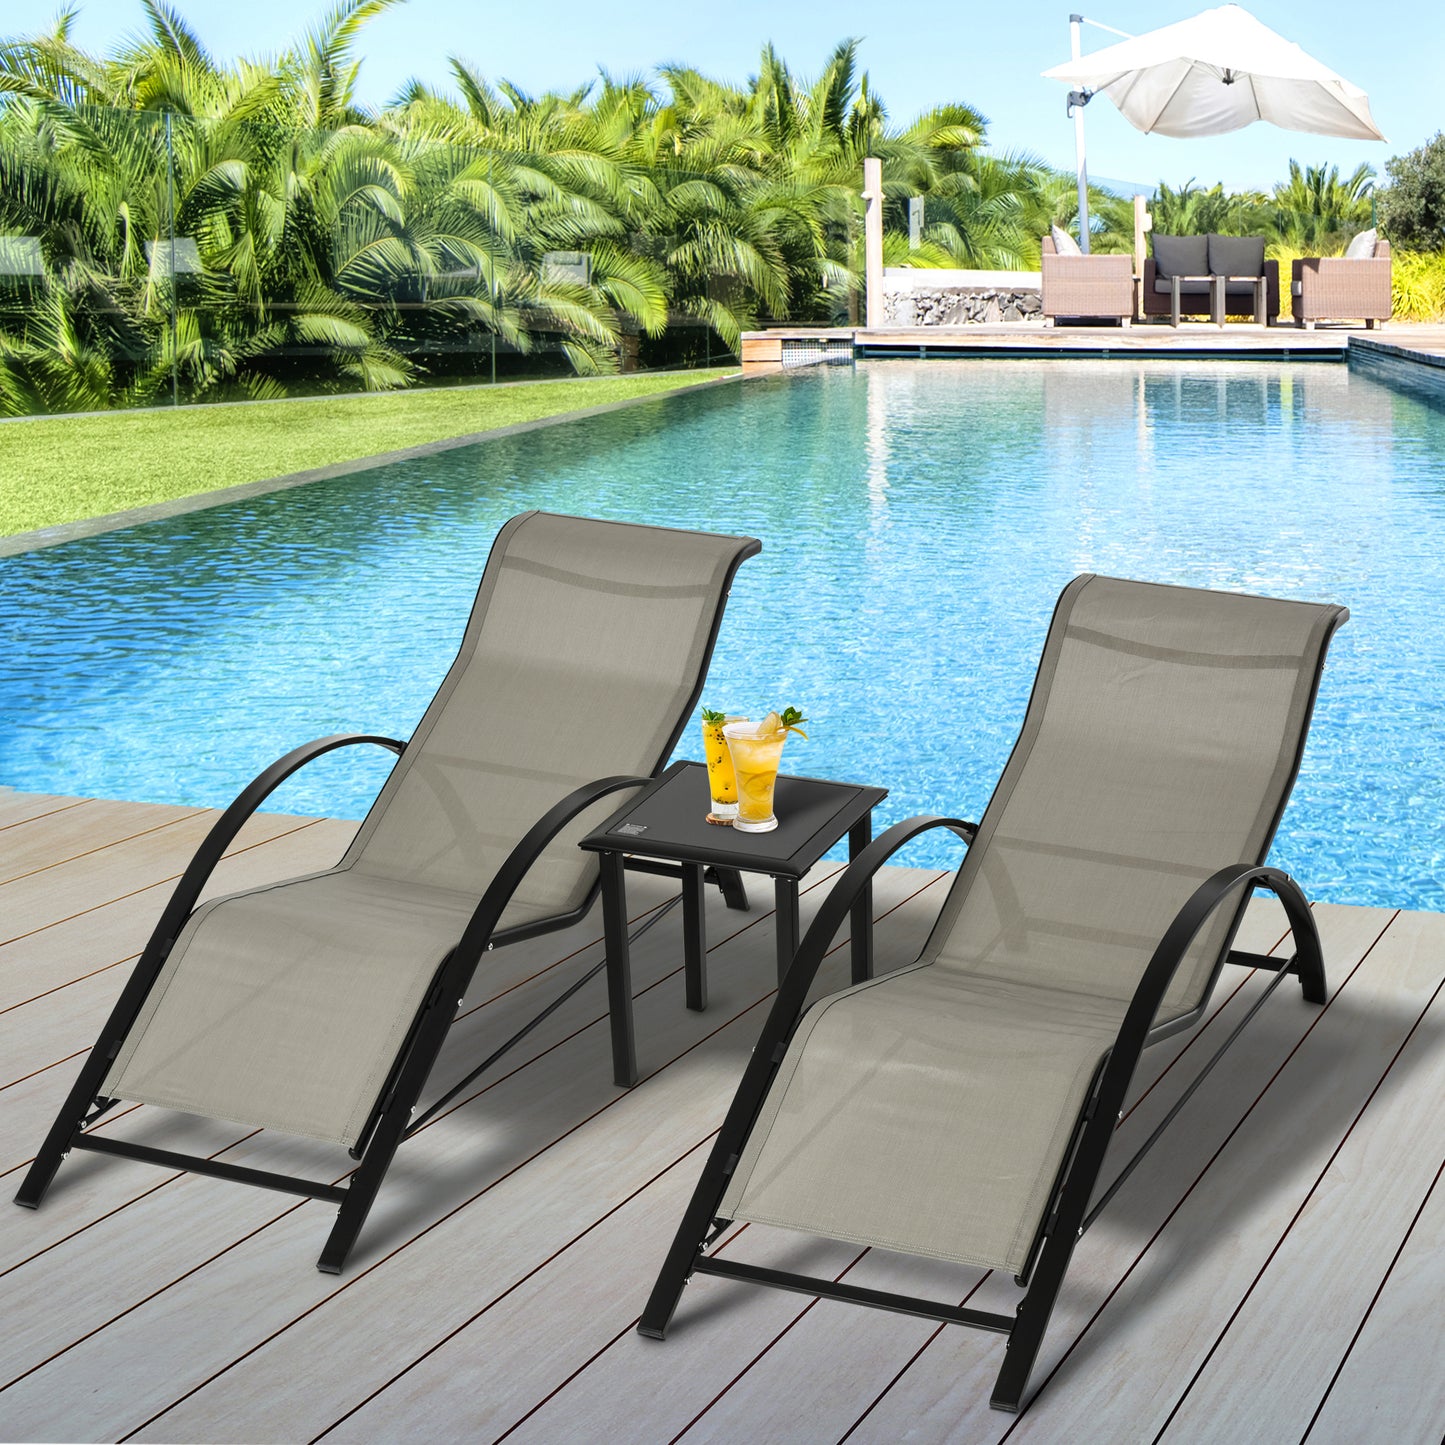 Outsunny 3 Pieces Patio Lounge Chair Set PE Rattan Wicker Beach Yard Garden Sunbathing Chair with Table, Grey Table